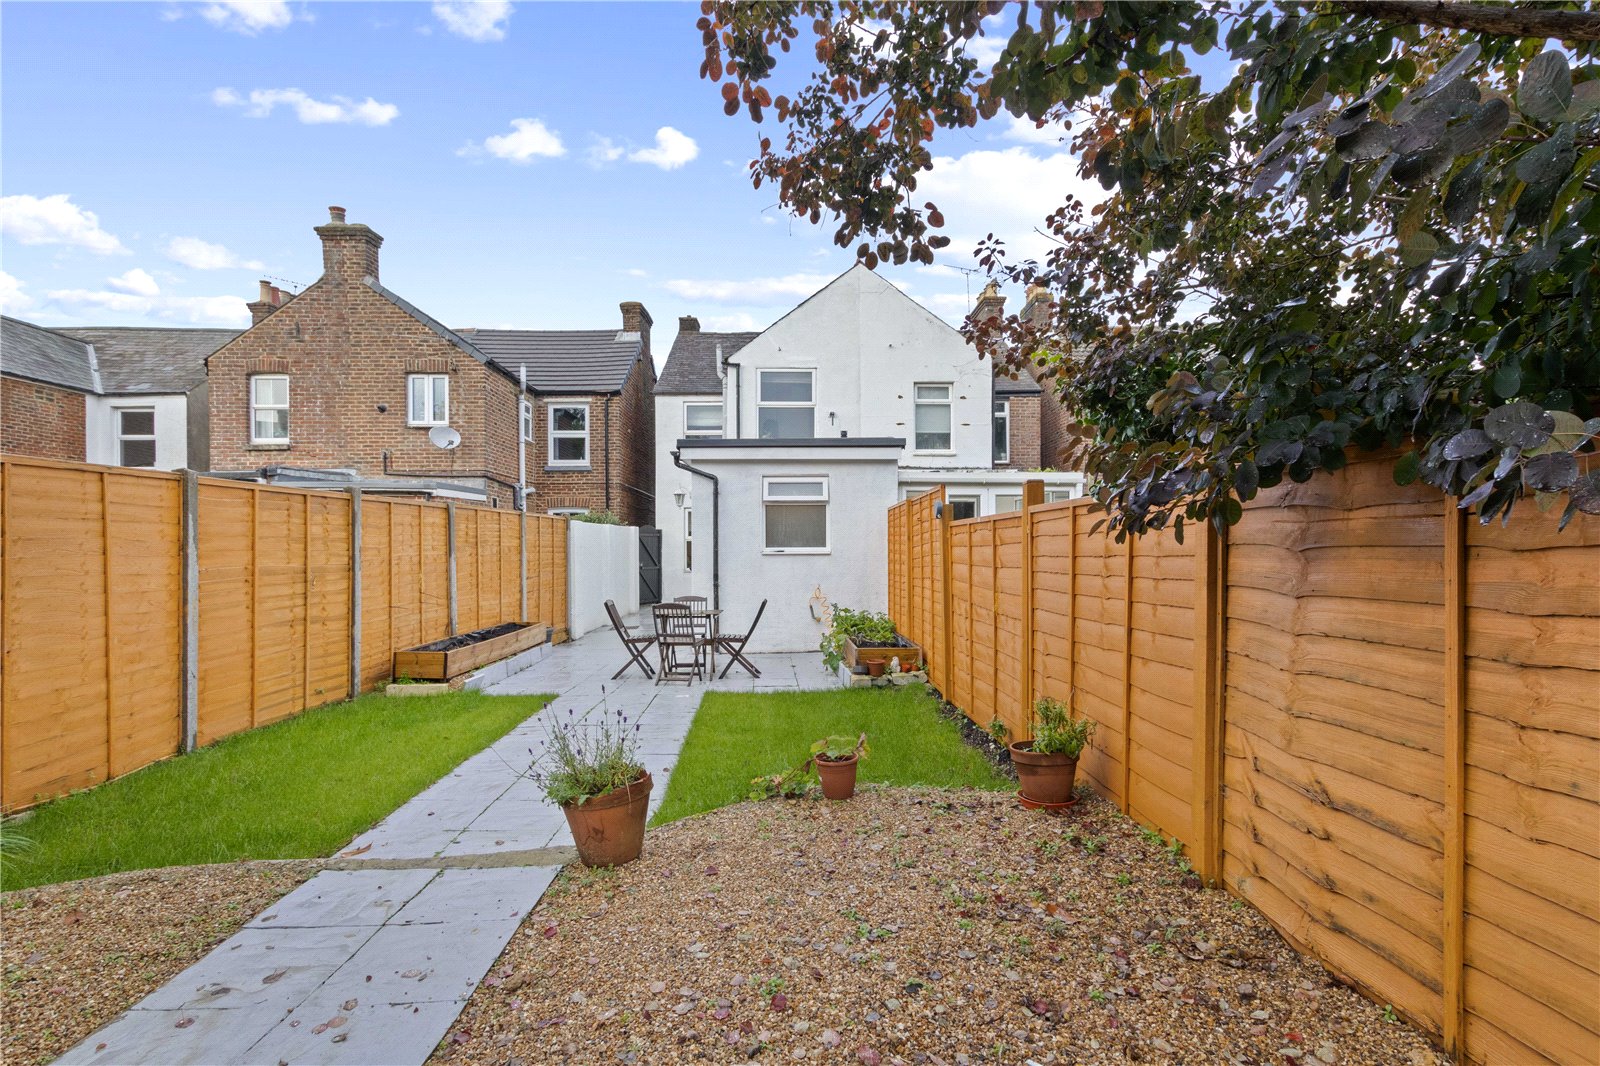 3 bed house for sale in Spitalfield Lane, Chichester  - Property Image 16